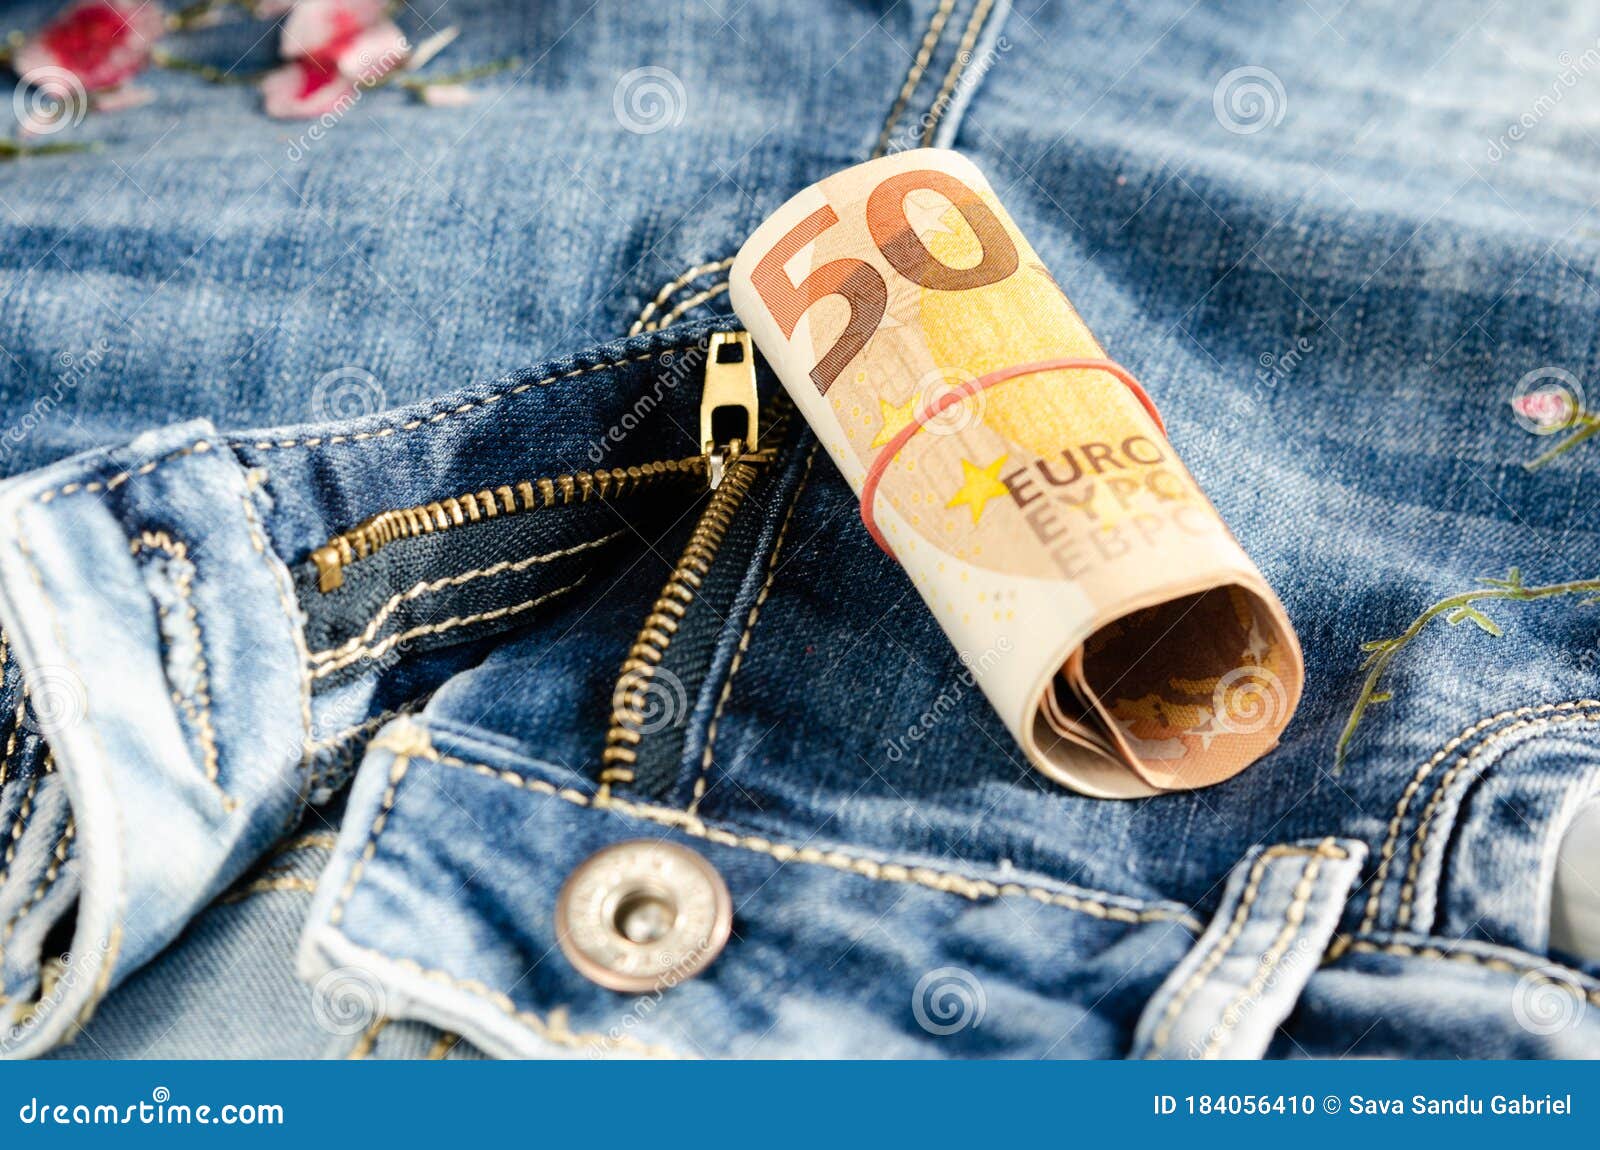 50 Euro on the Zipper of Jeans . Concept of Prostitution or Trafficking and  Exploitation of Women Stock Photo - Image of flirt, sexual: 184056410